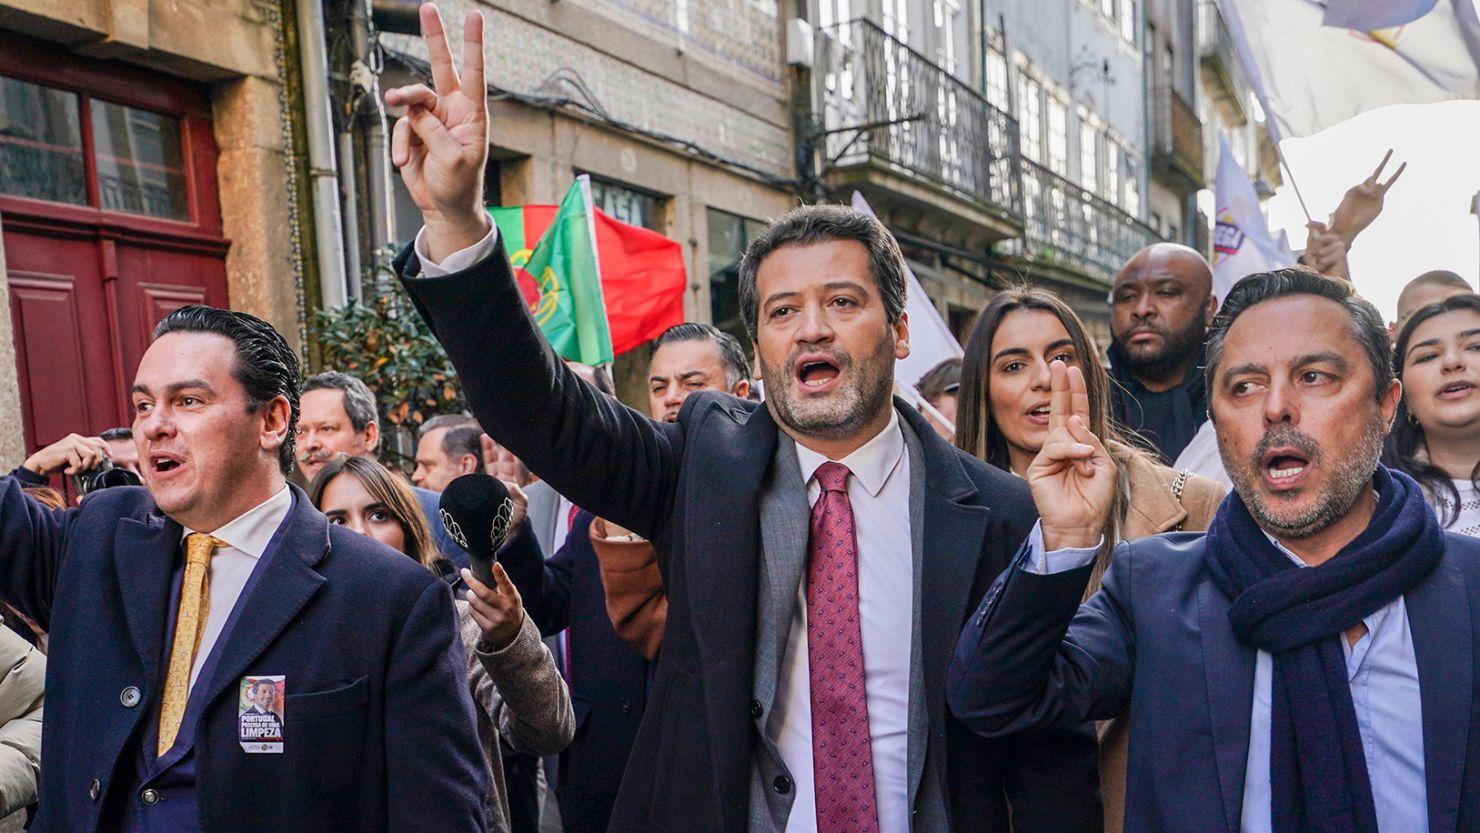 Andre Ventura, center, who leads the right-wing populist Chega party, greets supporters during a campaign rally in Braga, Portugal, on February 27.